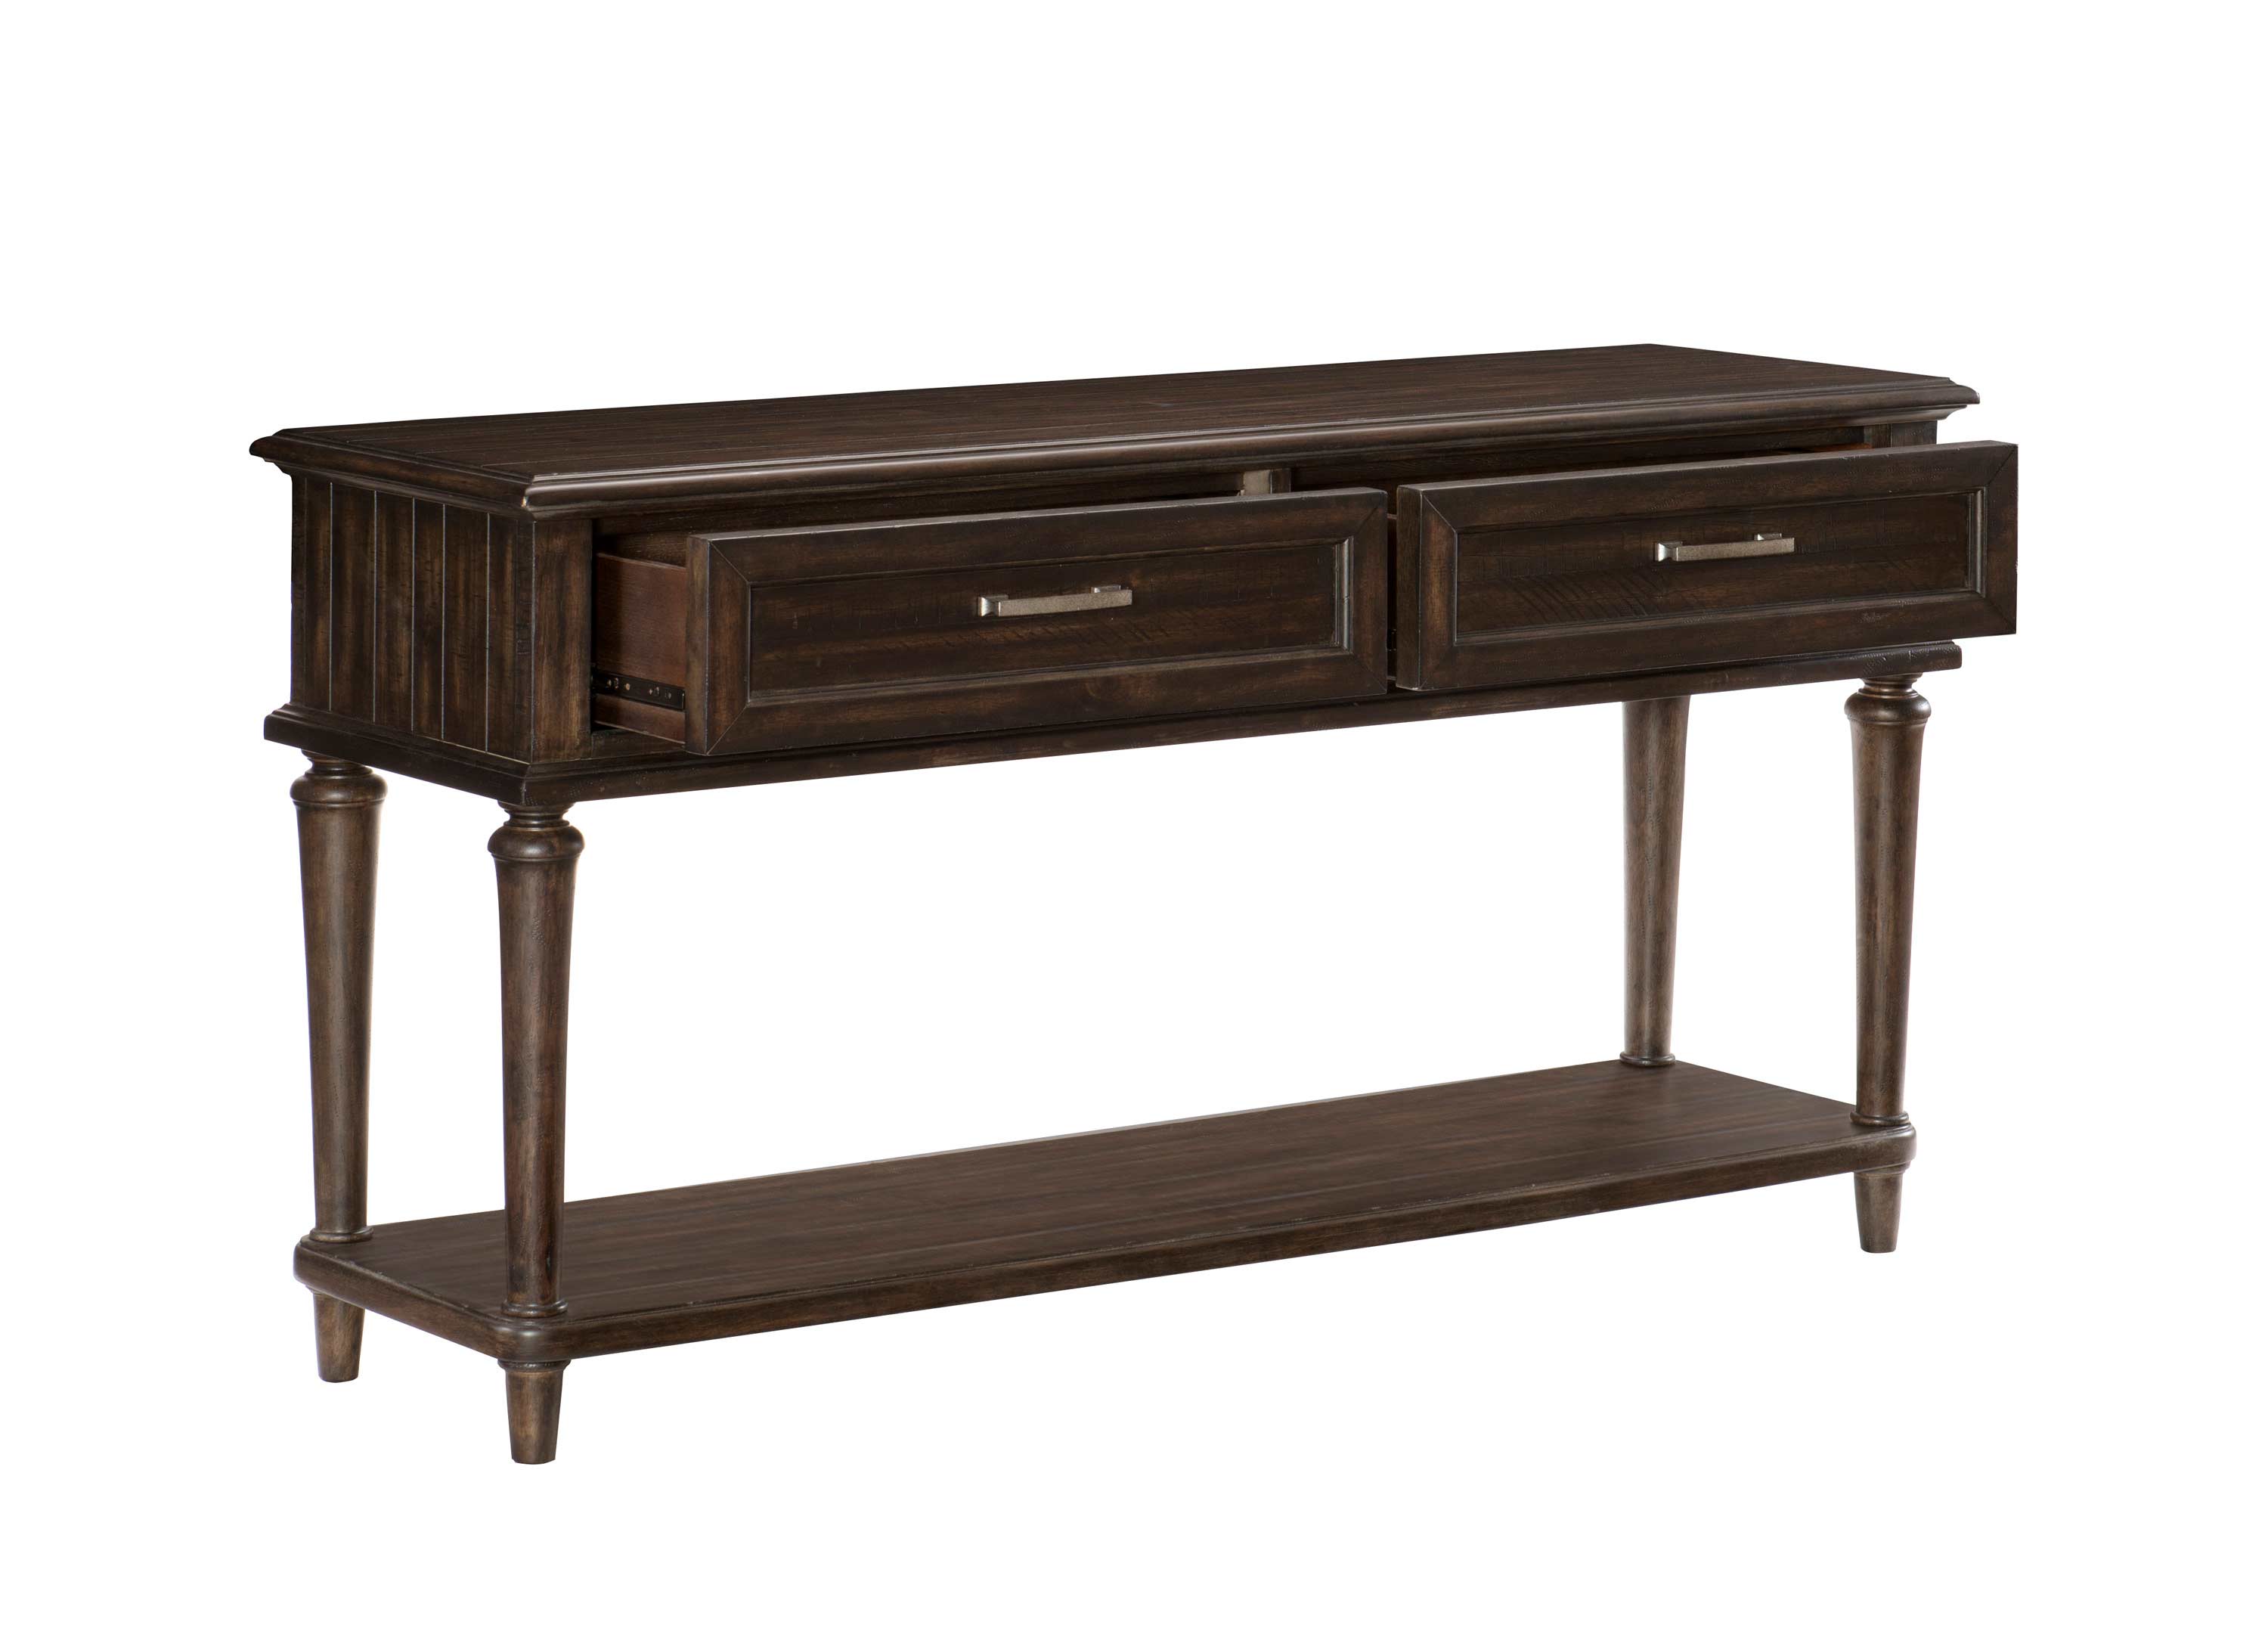 Homelegance Cardano Sofa Table with Two Functional Drawers - Driftwood Charcoal